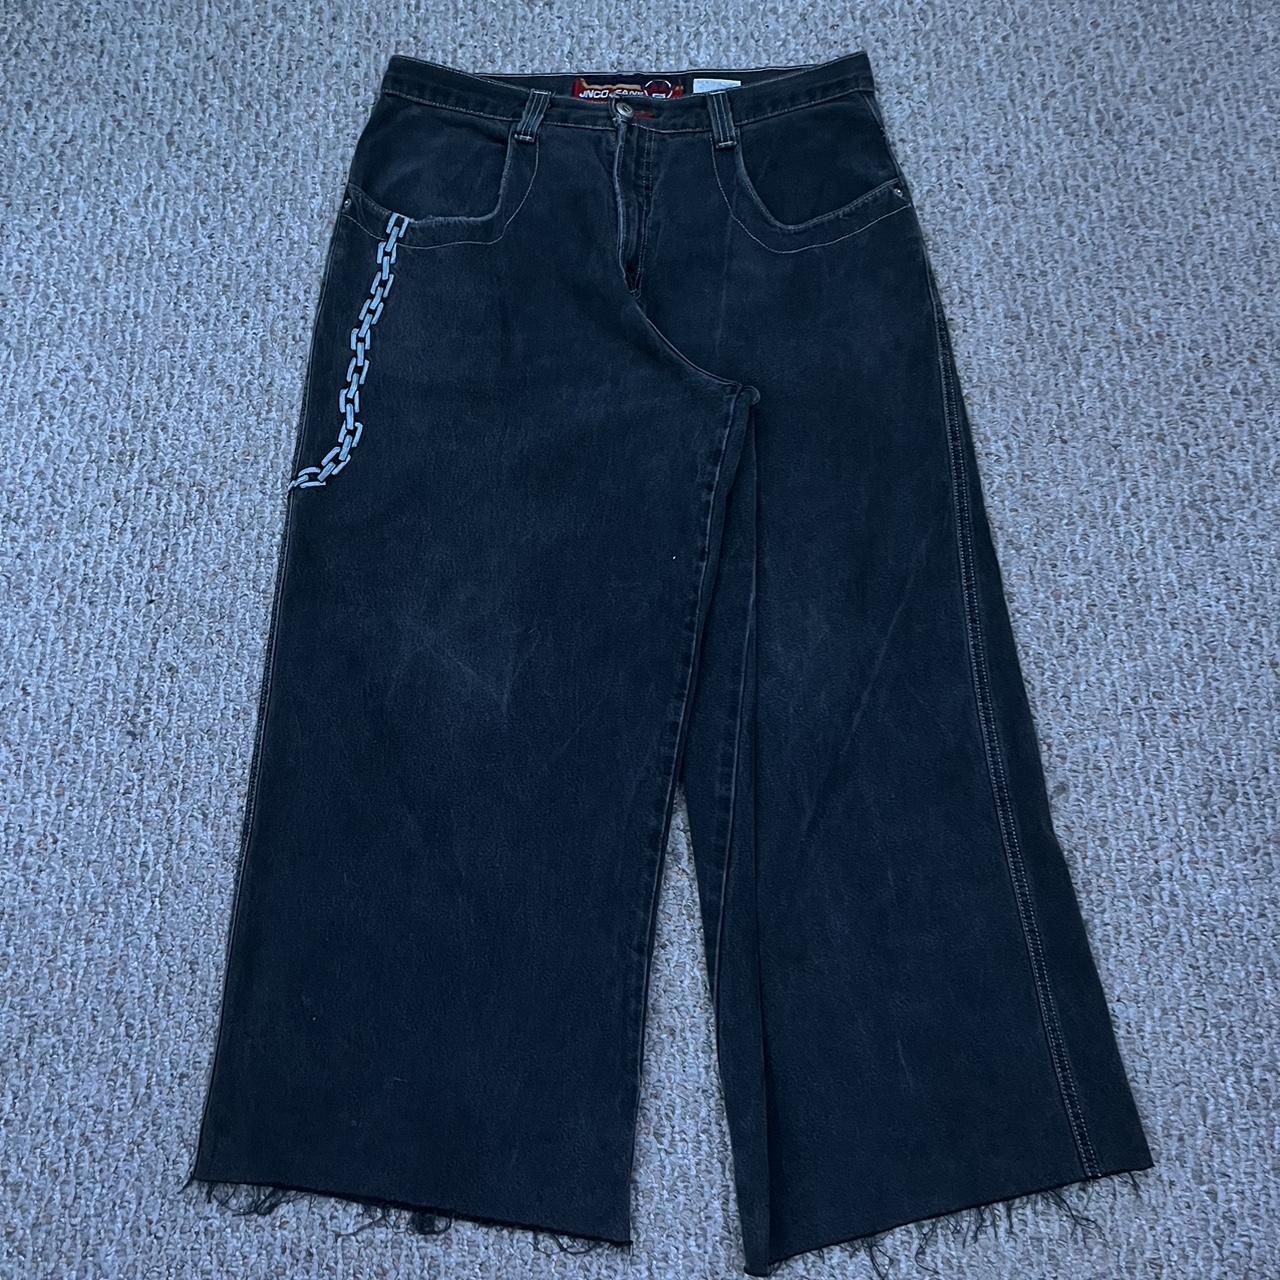 grail chain jncos.NGL im looking for money too so... - Depop